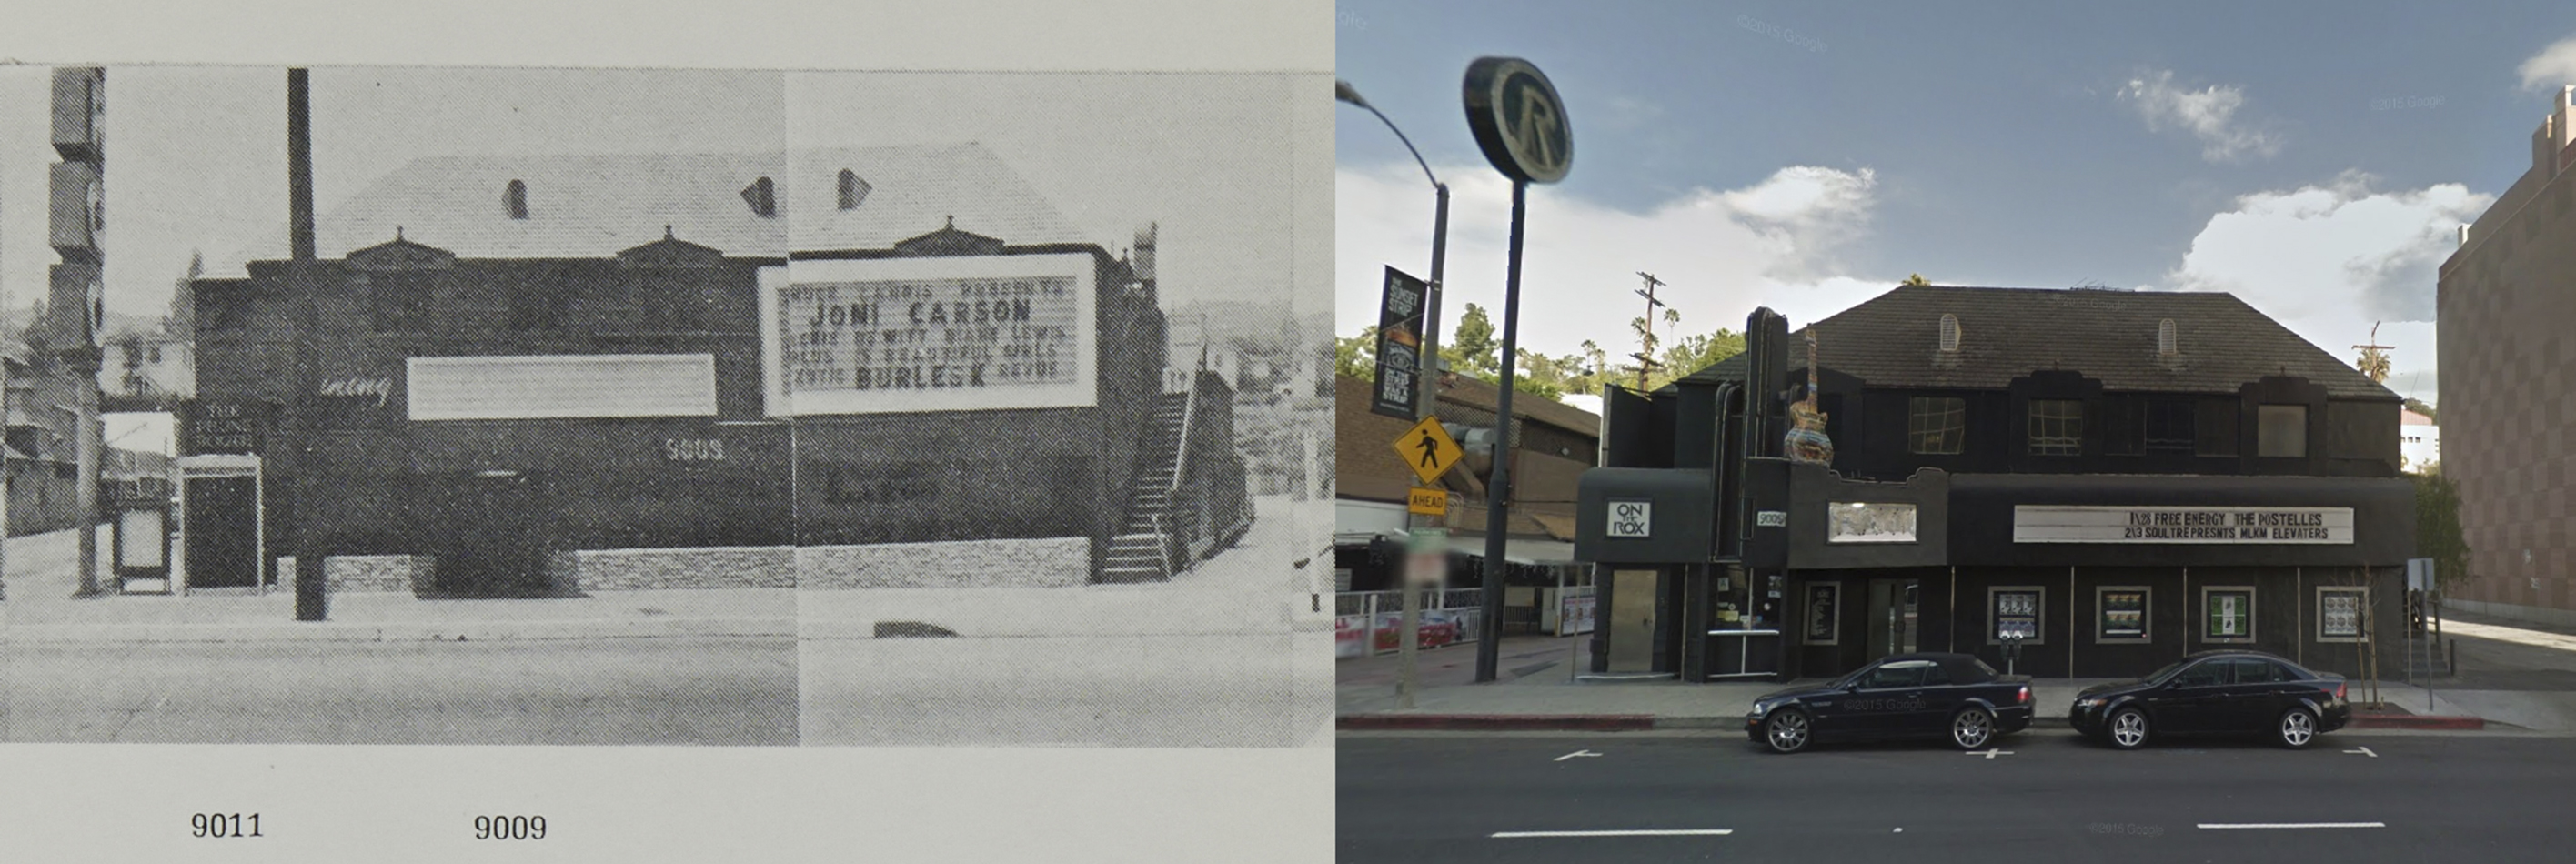 Largo, The Phone Booth and the Roxy Theatre at 9009 Sunset Blvd, 1966 and 2011. Copyright Edward Ruscha (1966) and Google streetview (2011).